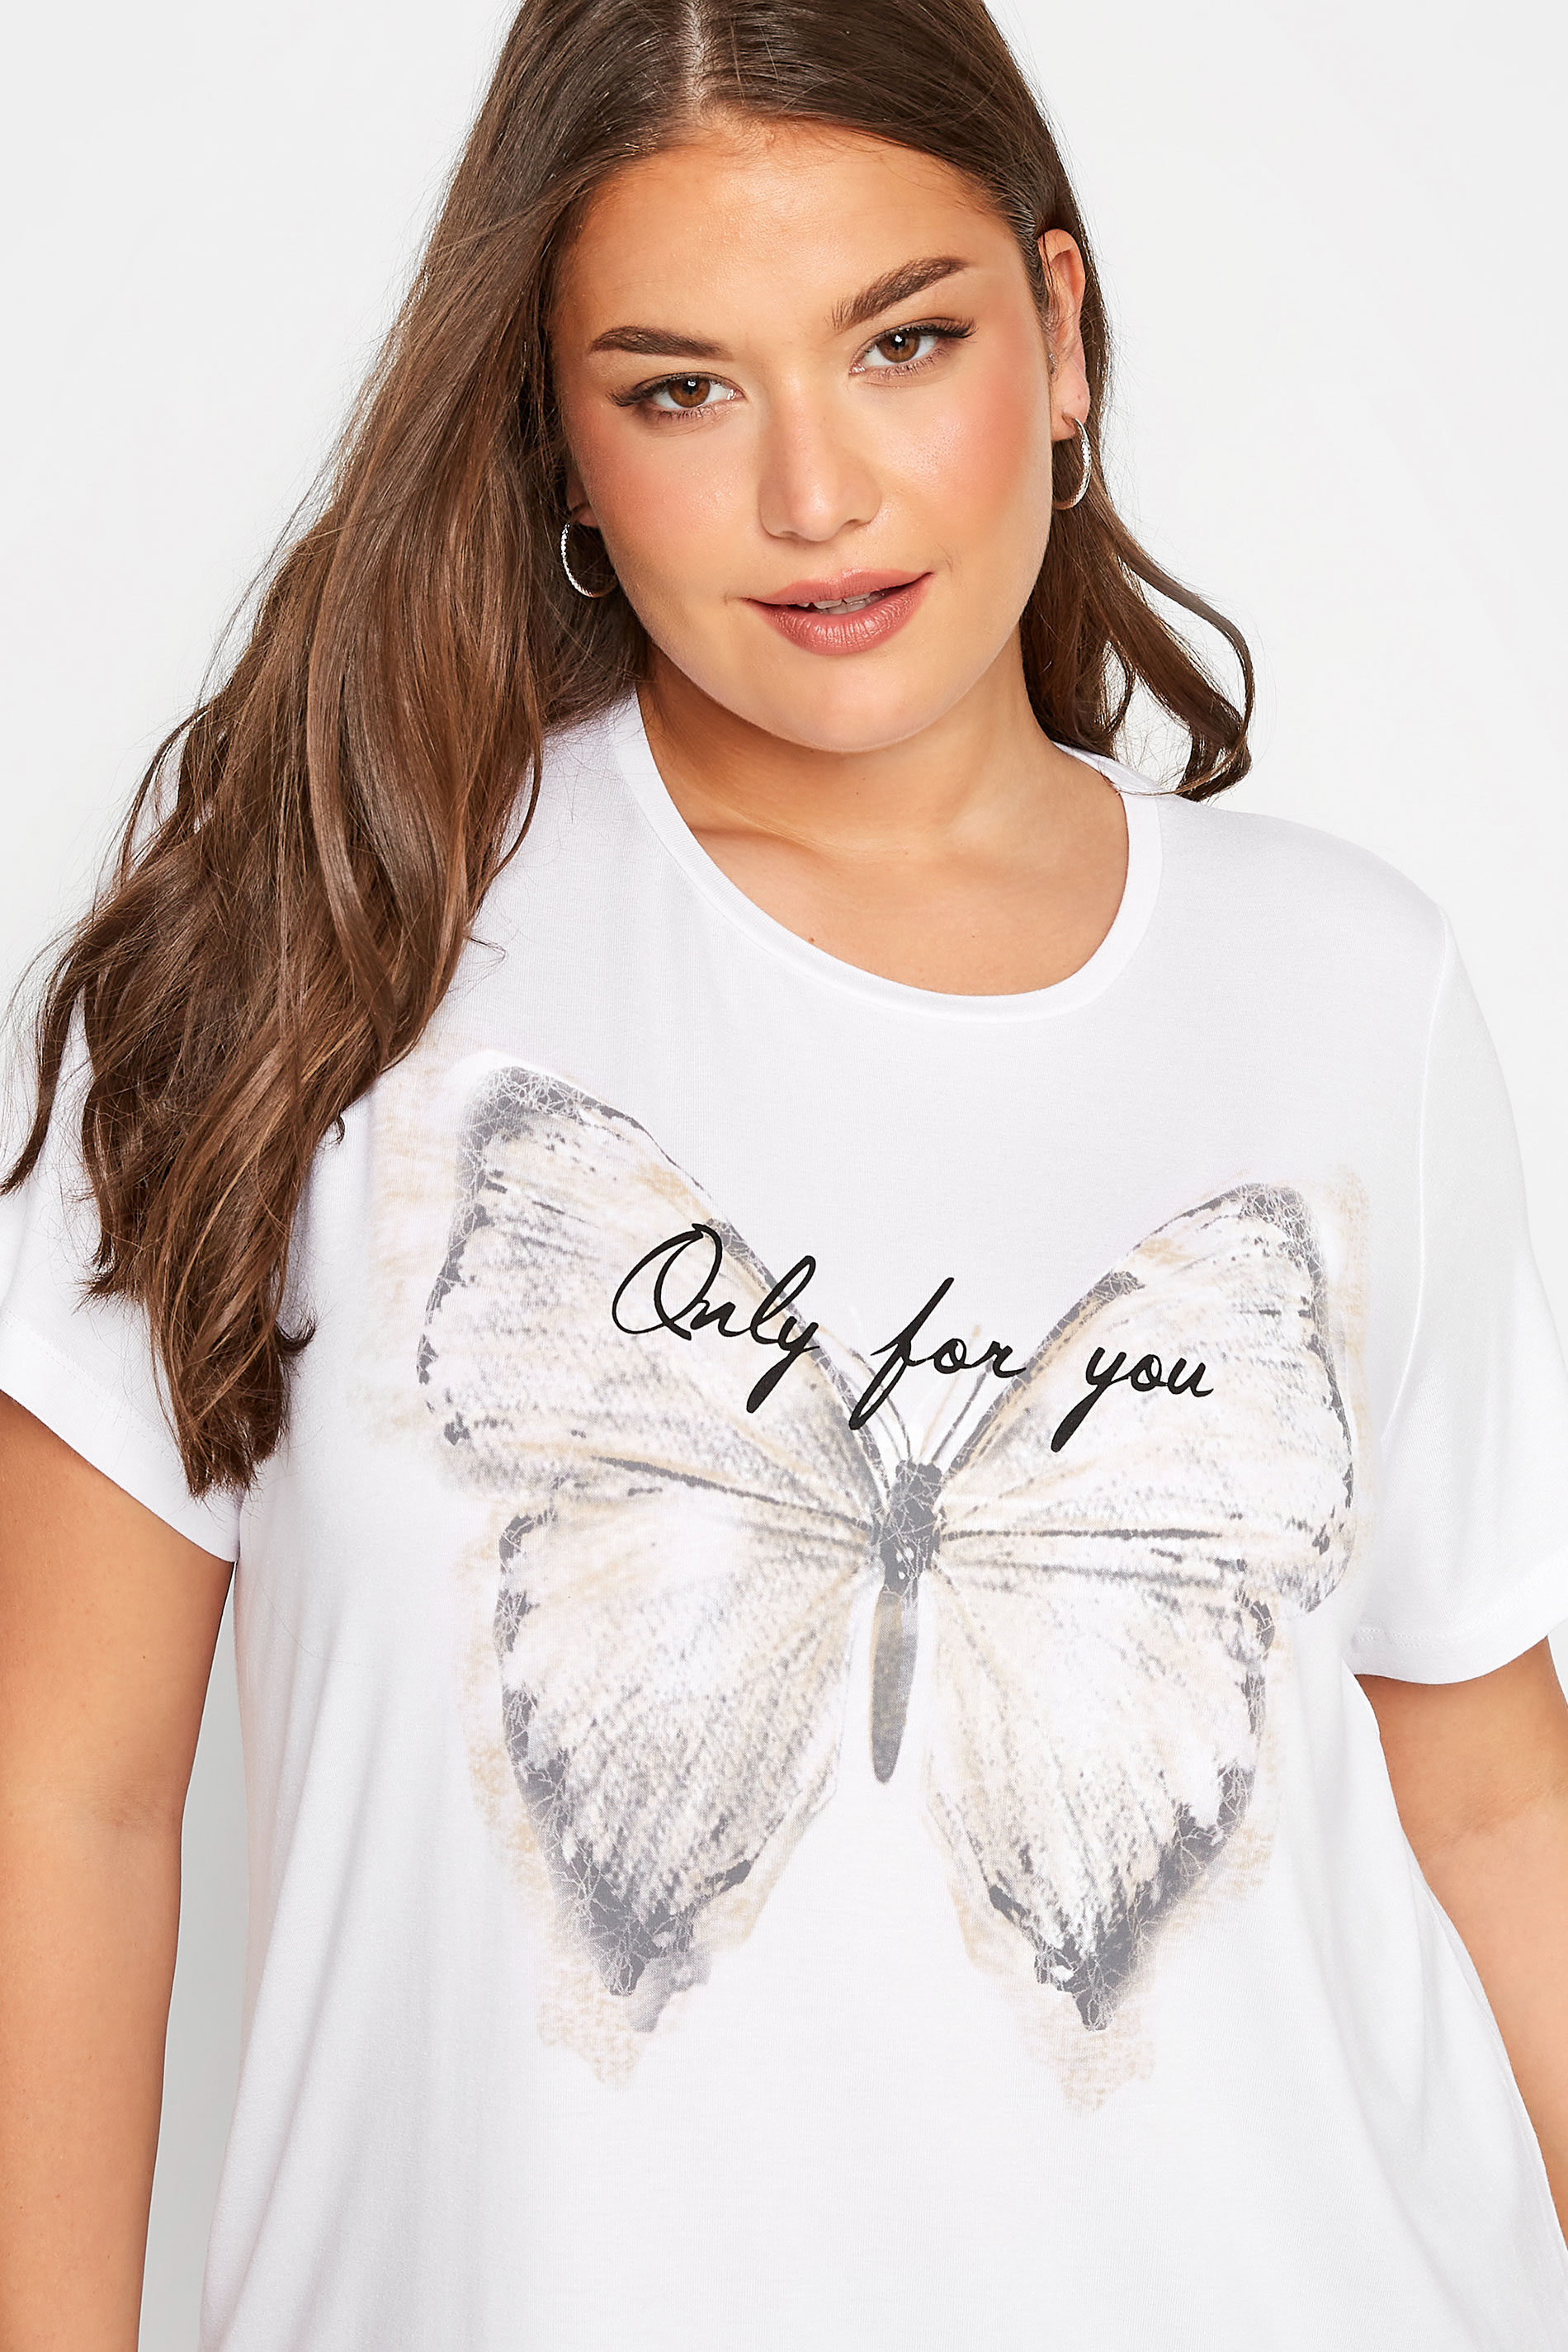 Grande taille  Tops Grande taille  Tops à Slogans | T-Shirt Blanc Papillon 'Only For You' - LQ37600